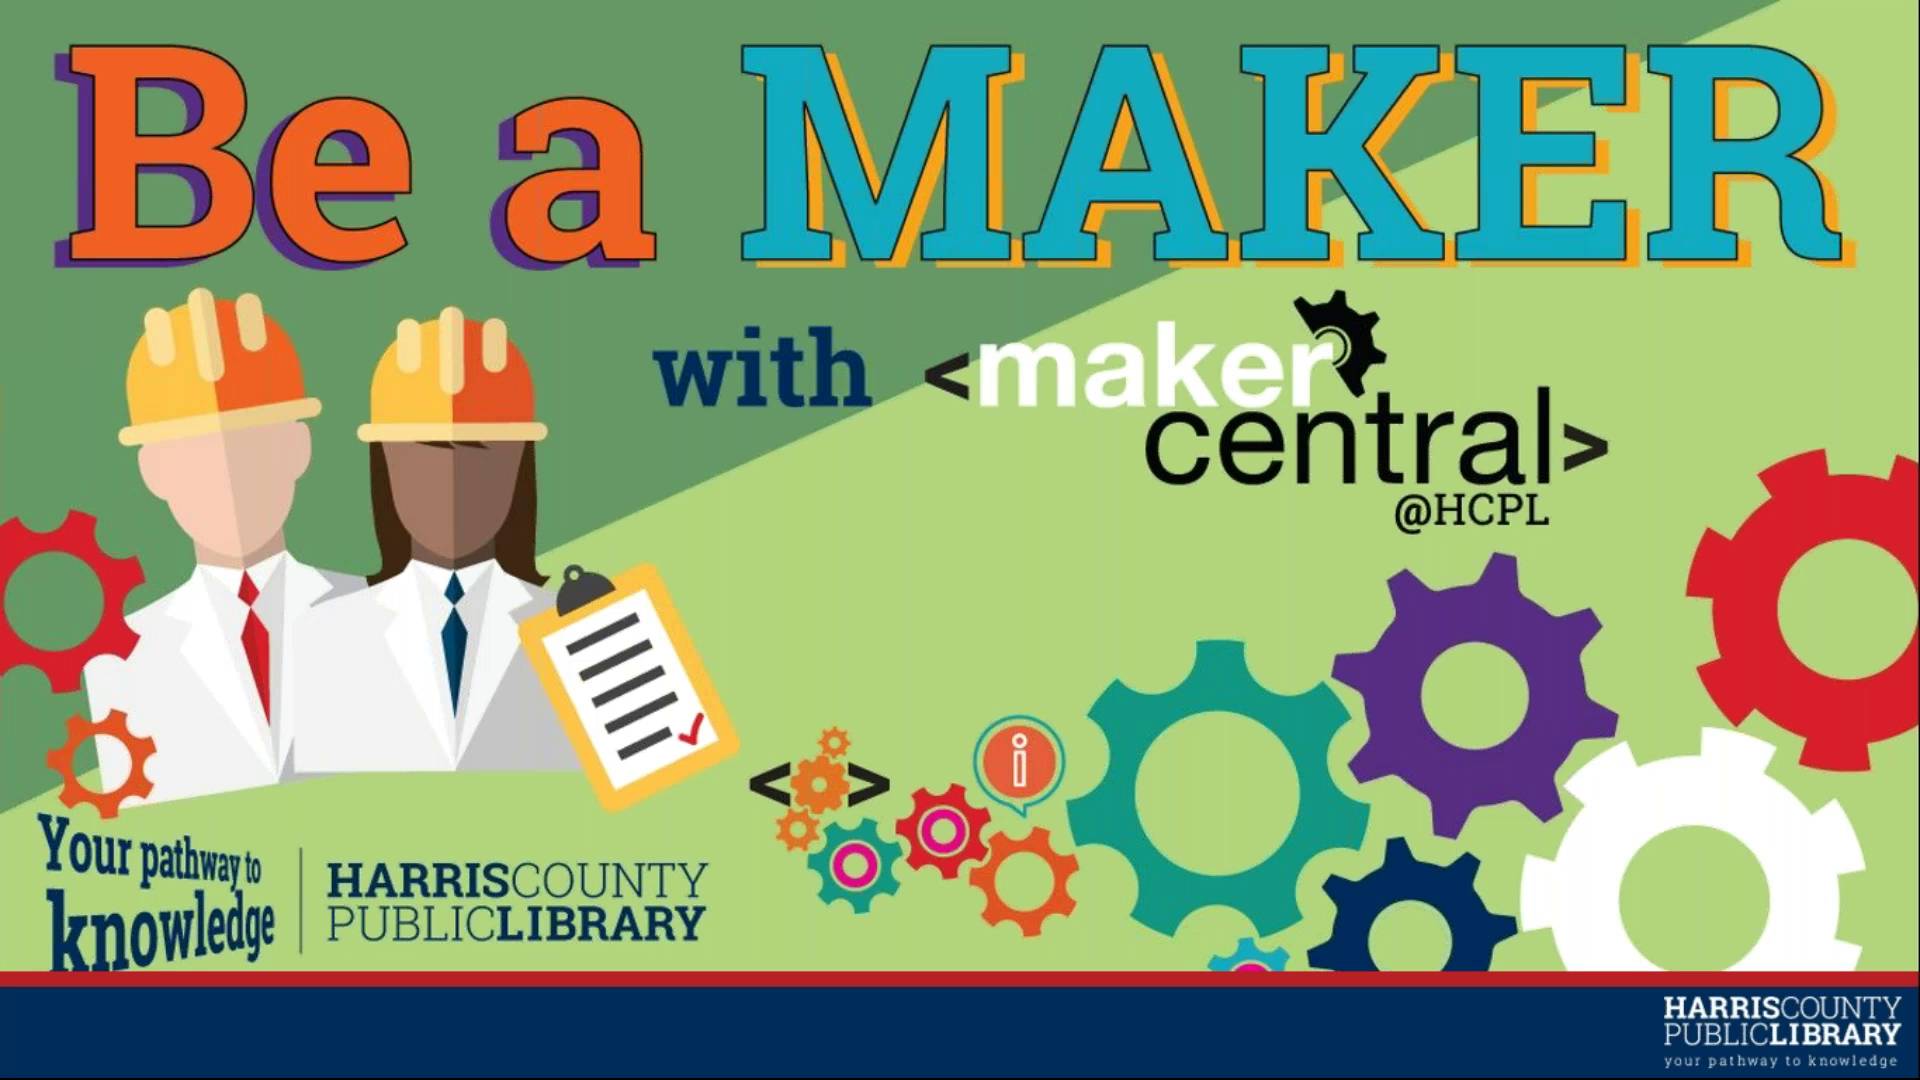 Harris County Public Library: Be a Maker